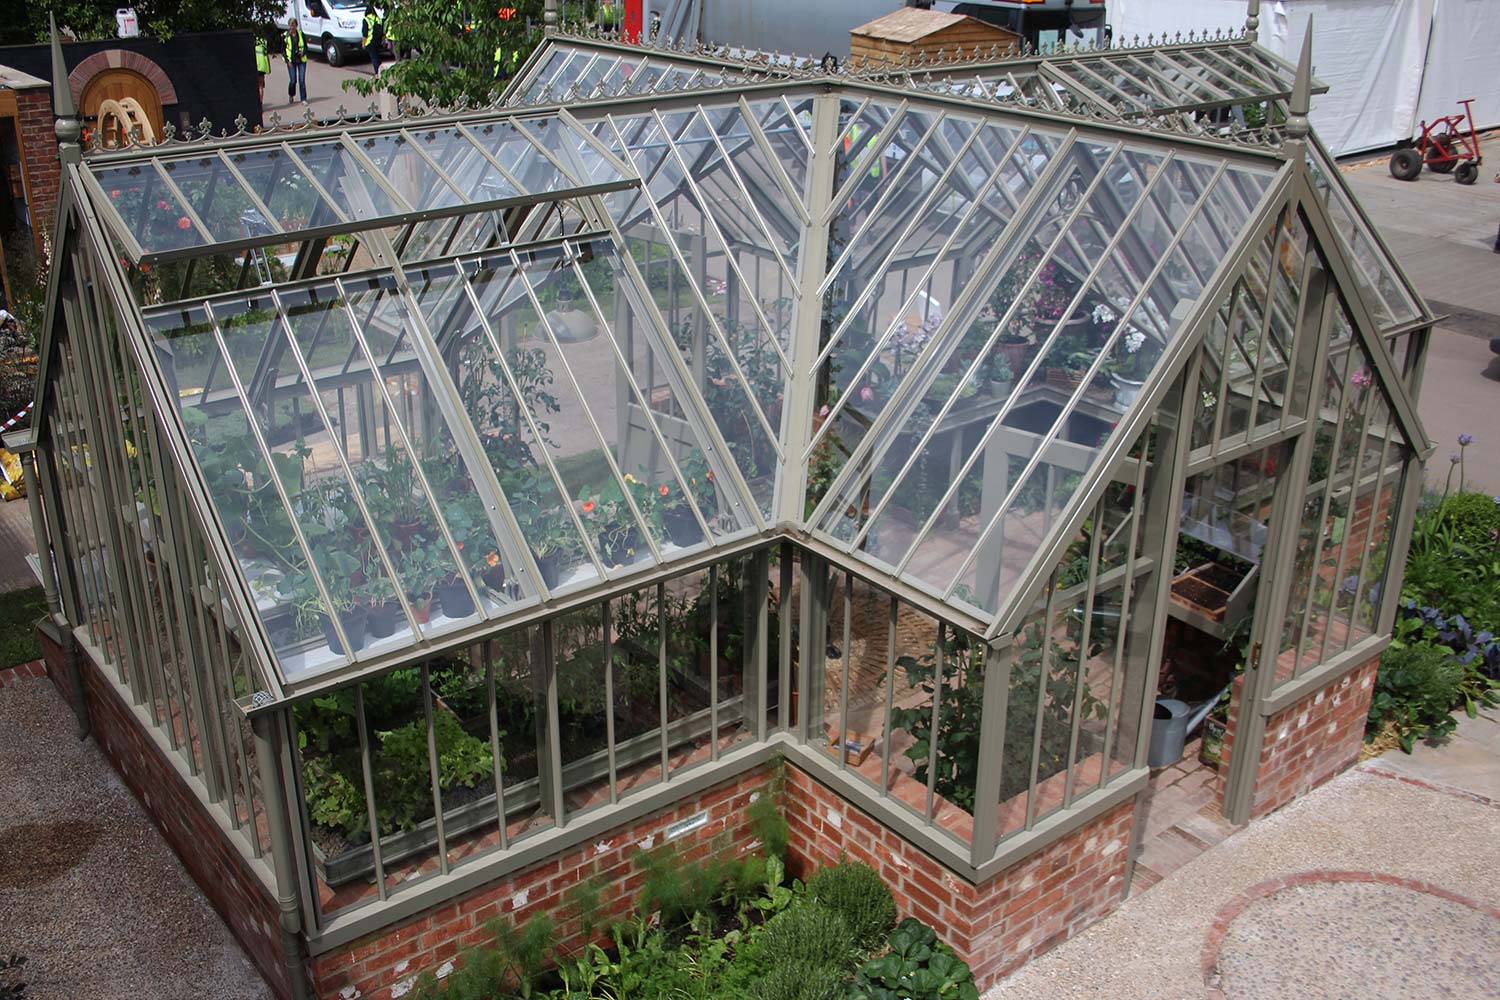 The Masson Greenhouse from the Alitex Kew Greenhouse Collection